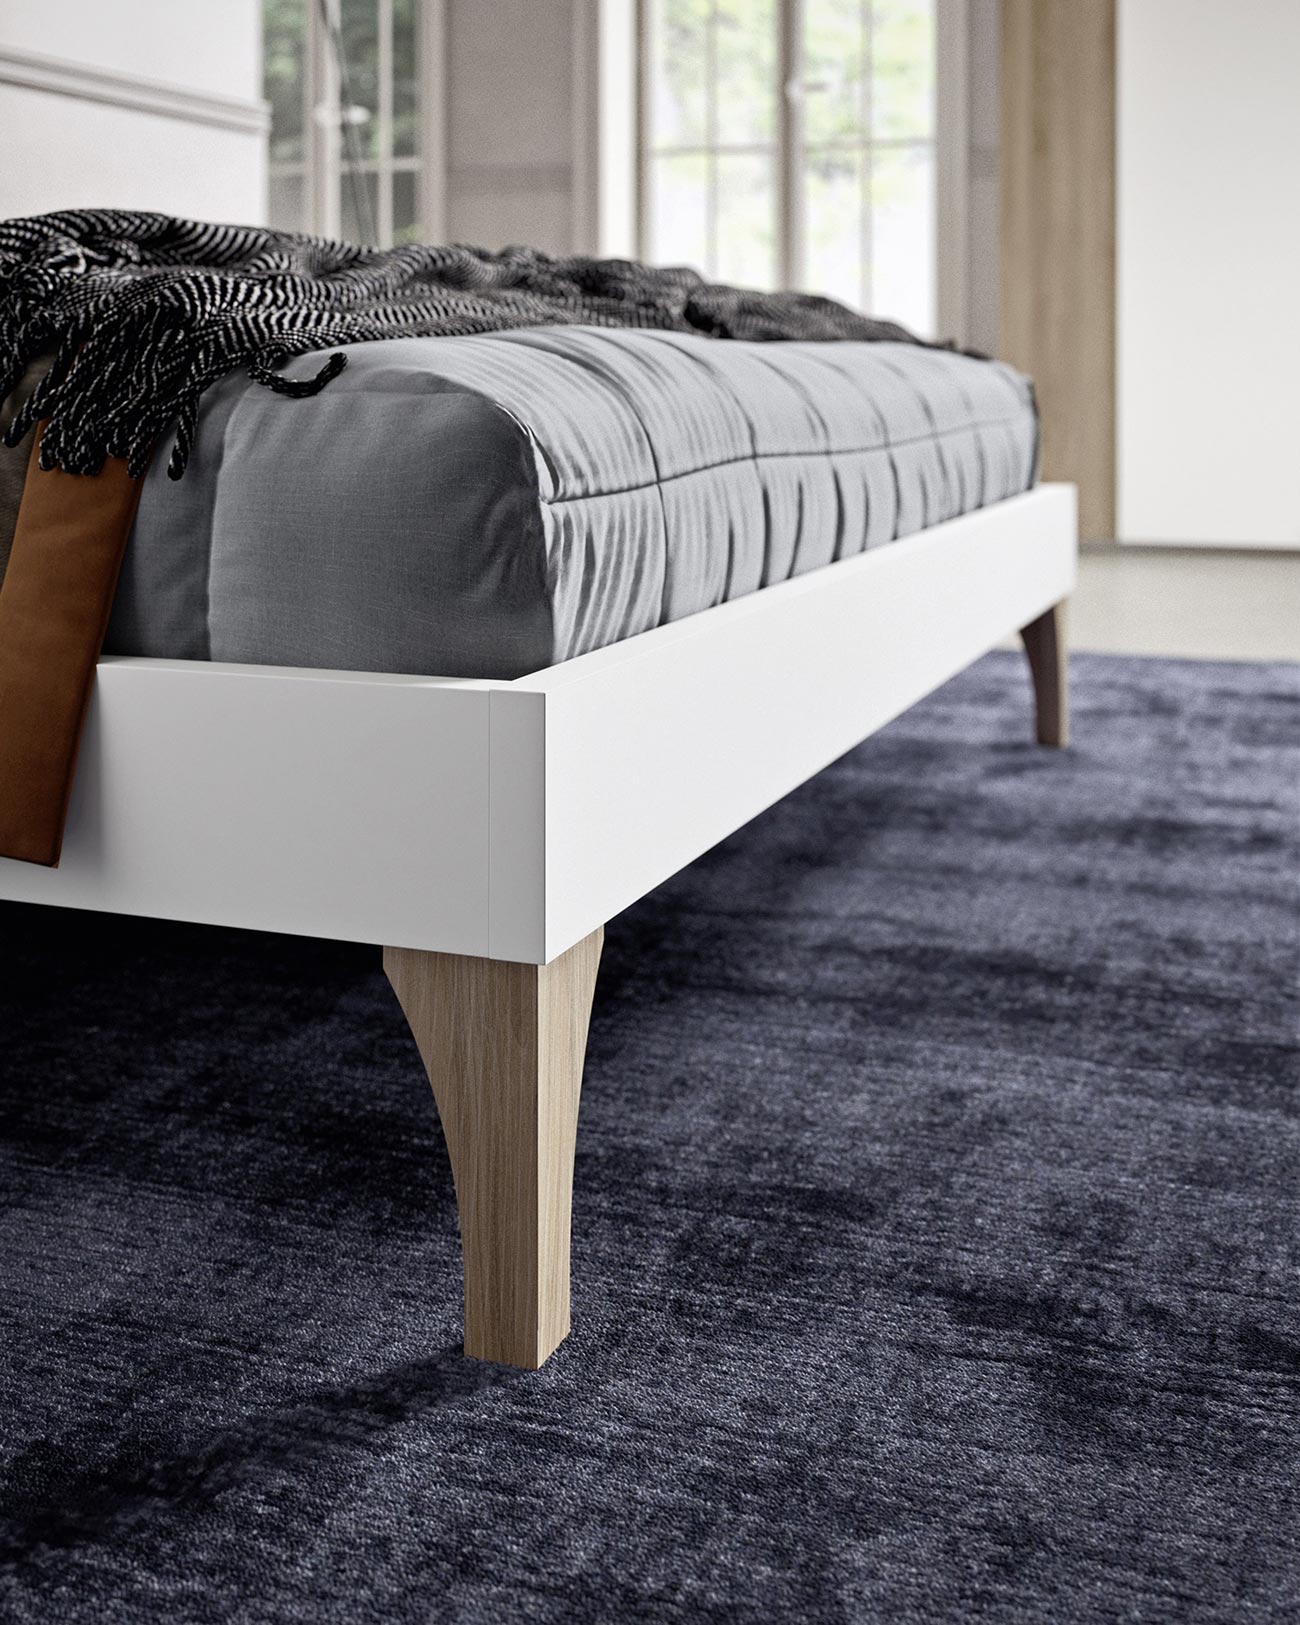 Modern double bed with designer multicolour pattern